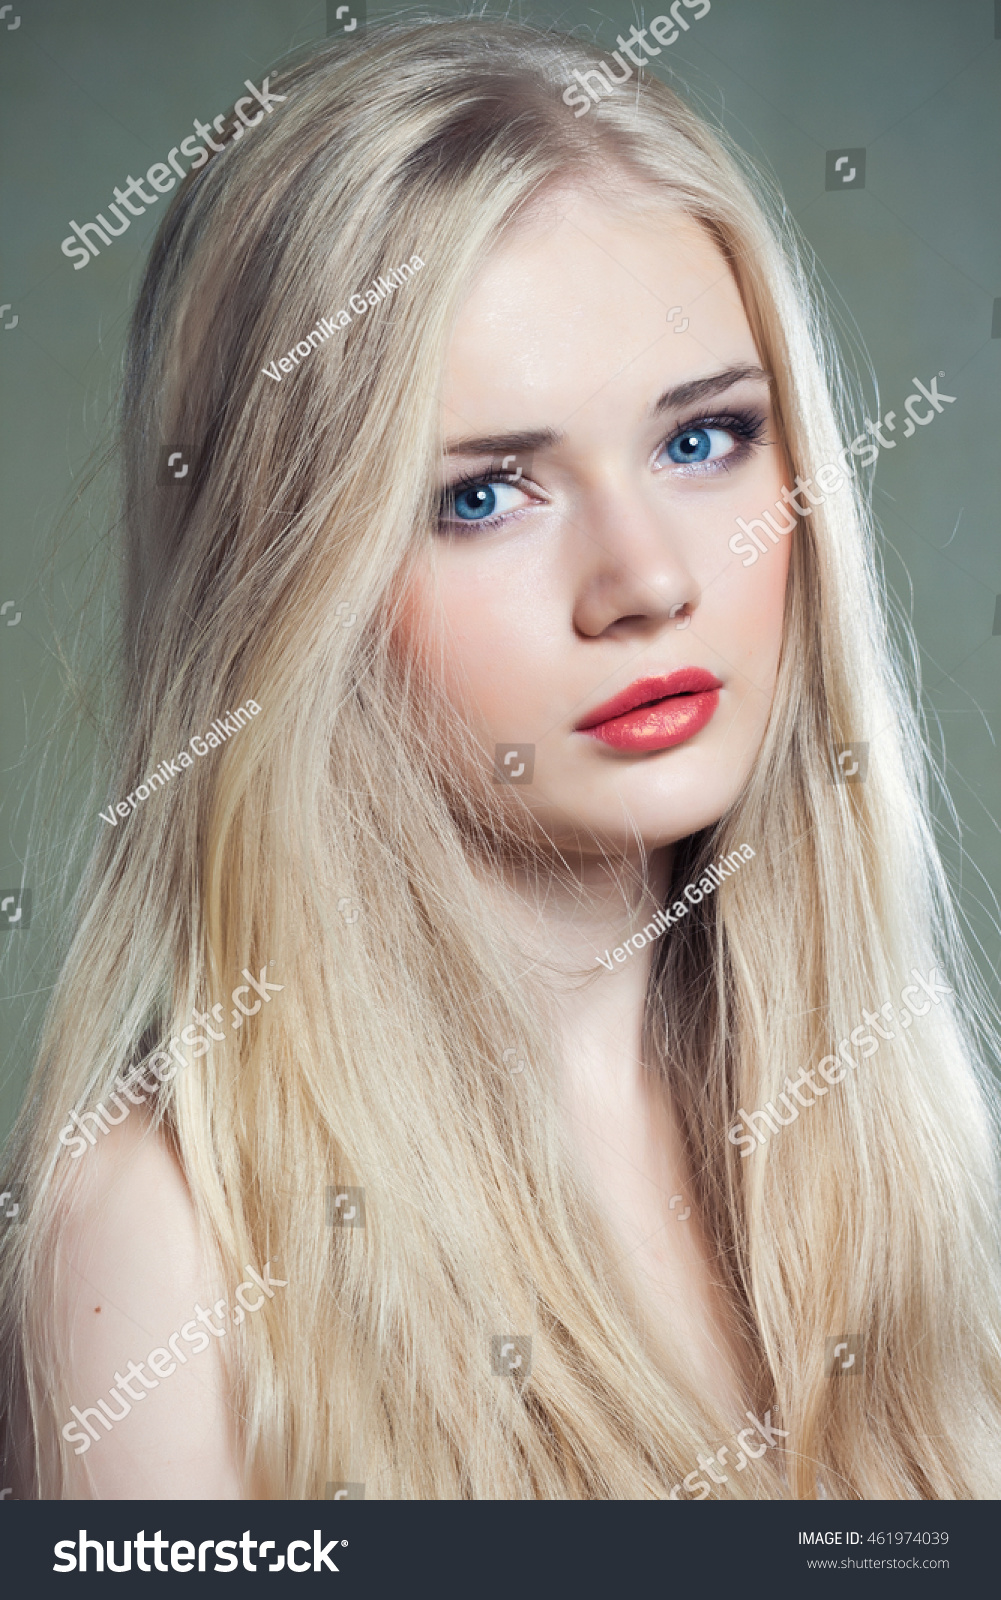 28 Top Images Blonde Hair Blue Eyes Holocaust : Female long blonde hair and blue eyes wearing a loose knit ...